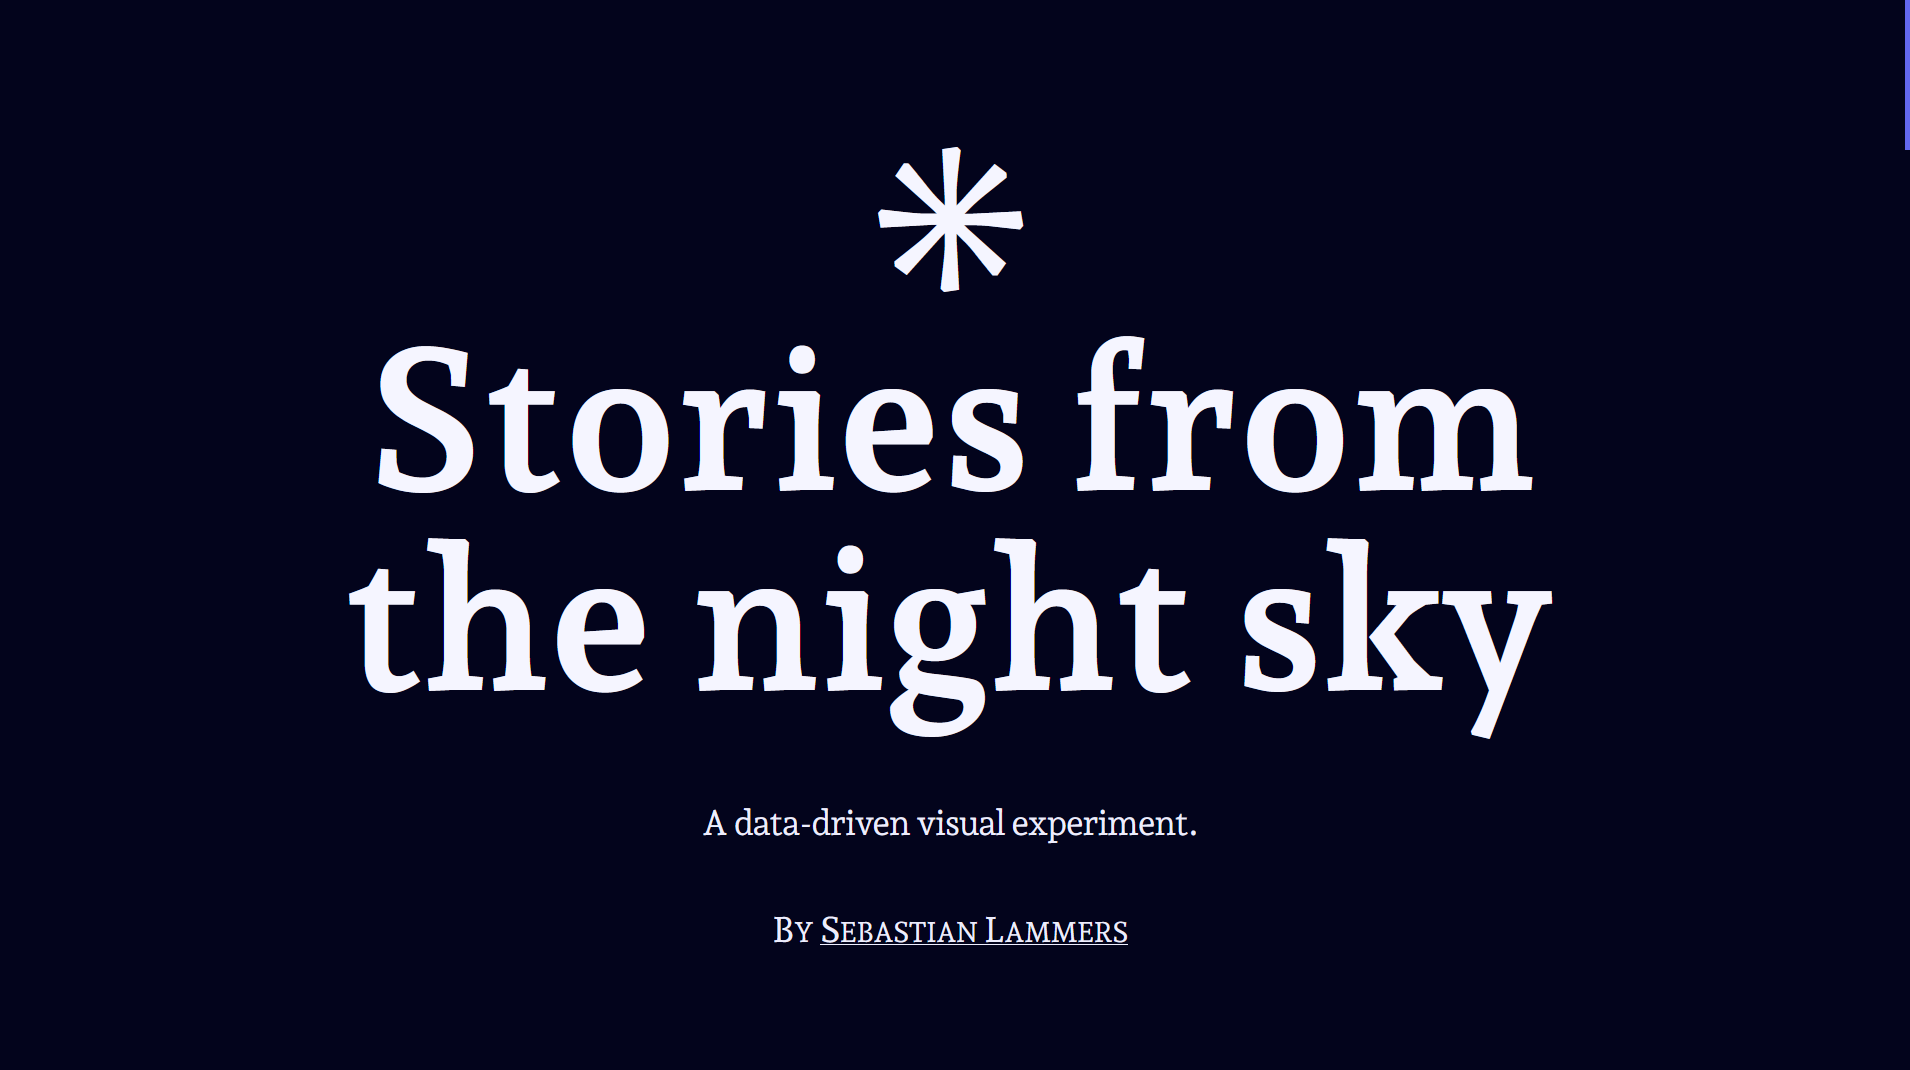 Screenshot of the hero-section of the project that has the title 'Stories from the night sky' in big white letters on very dark blue background.